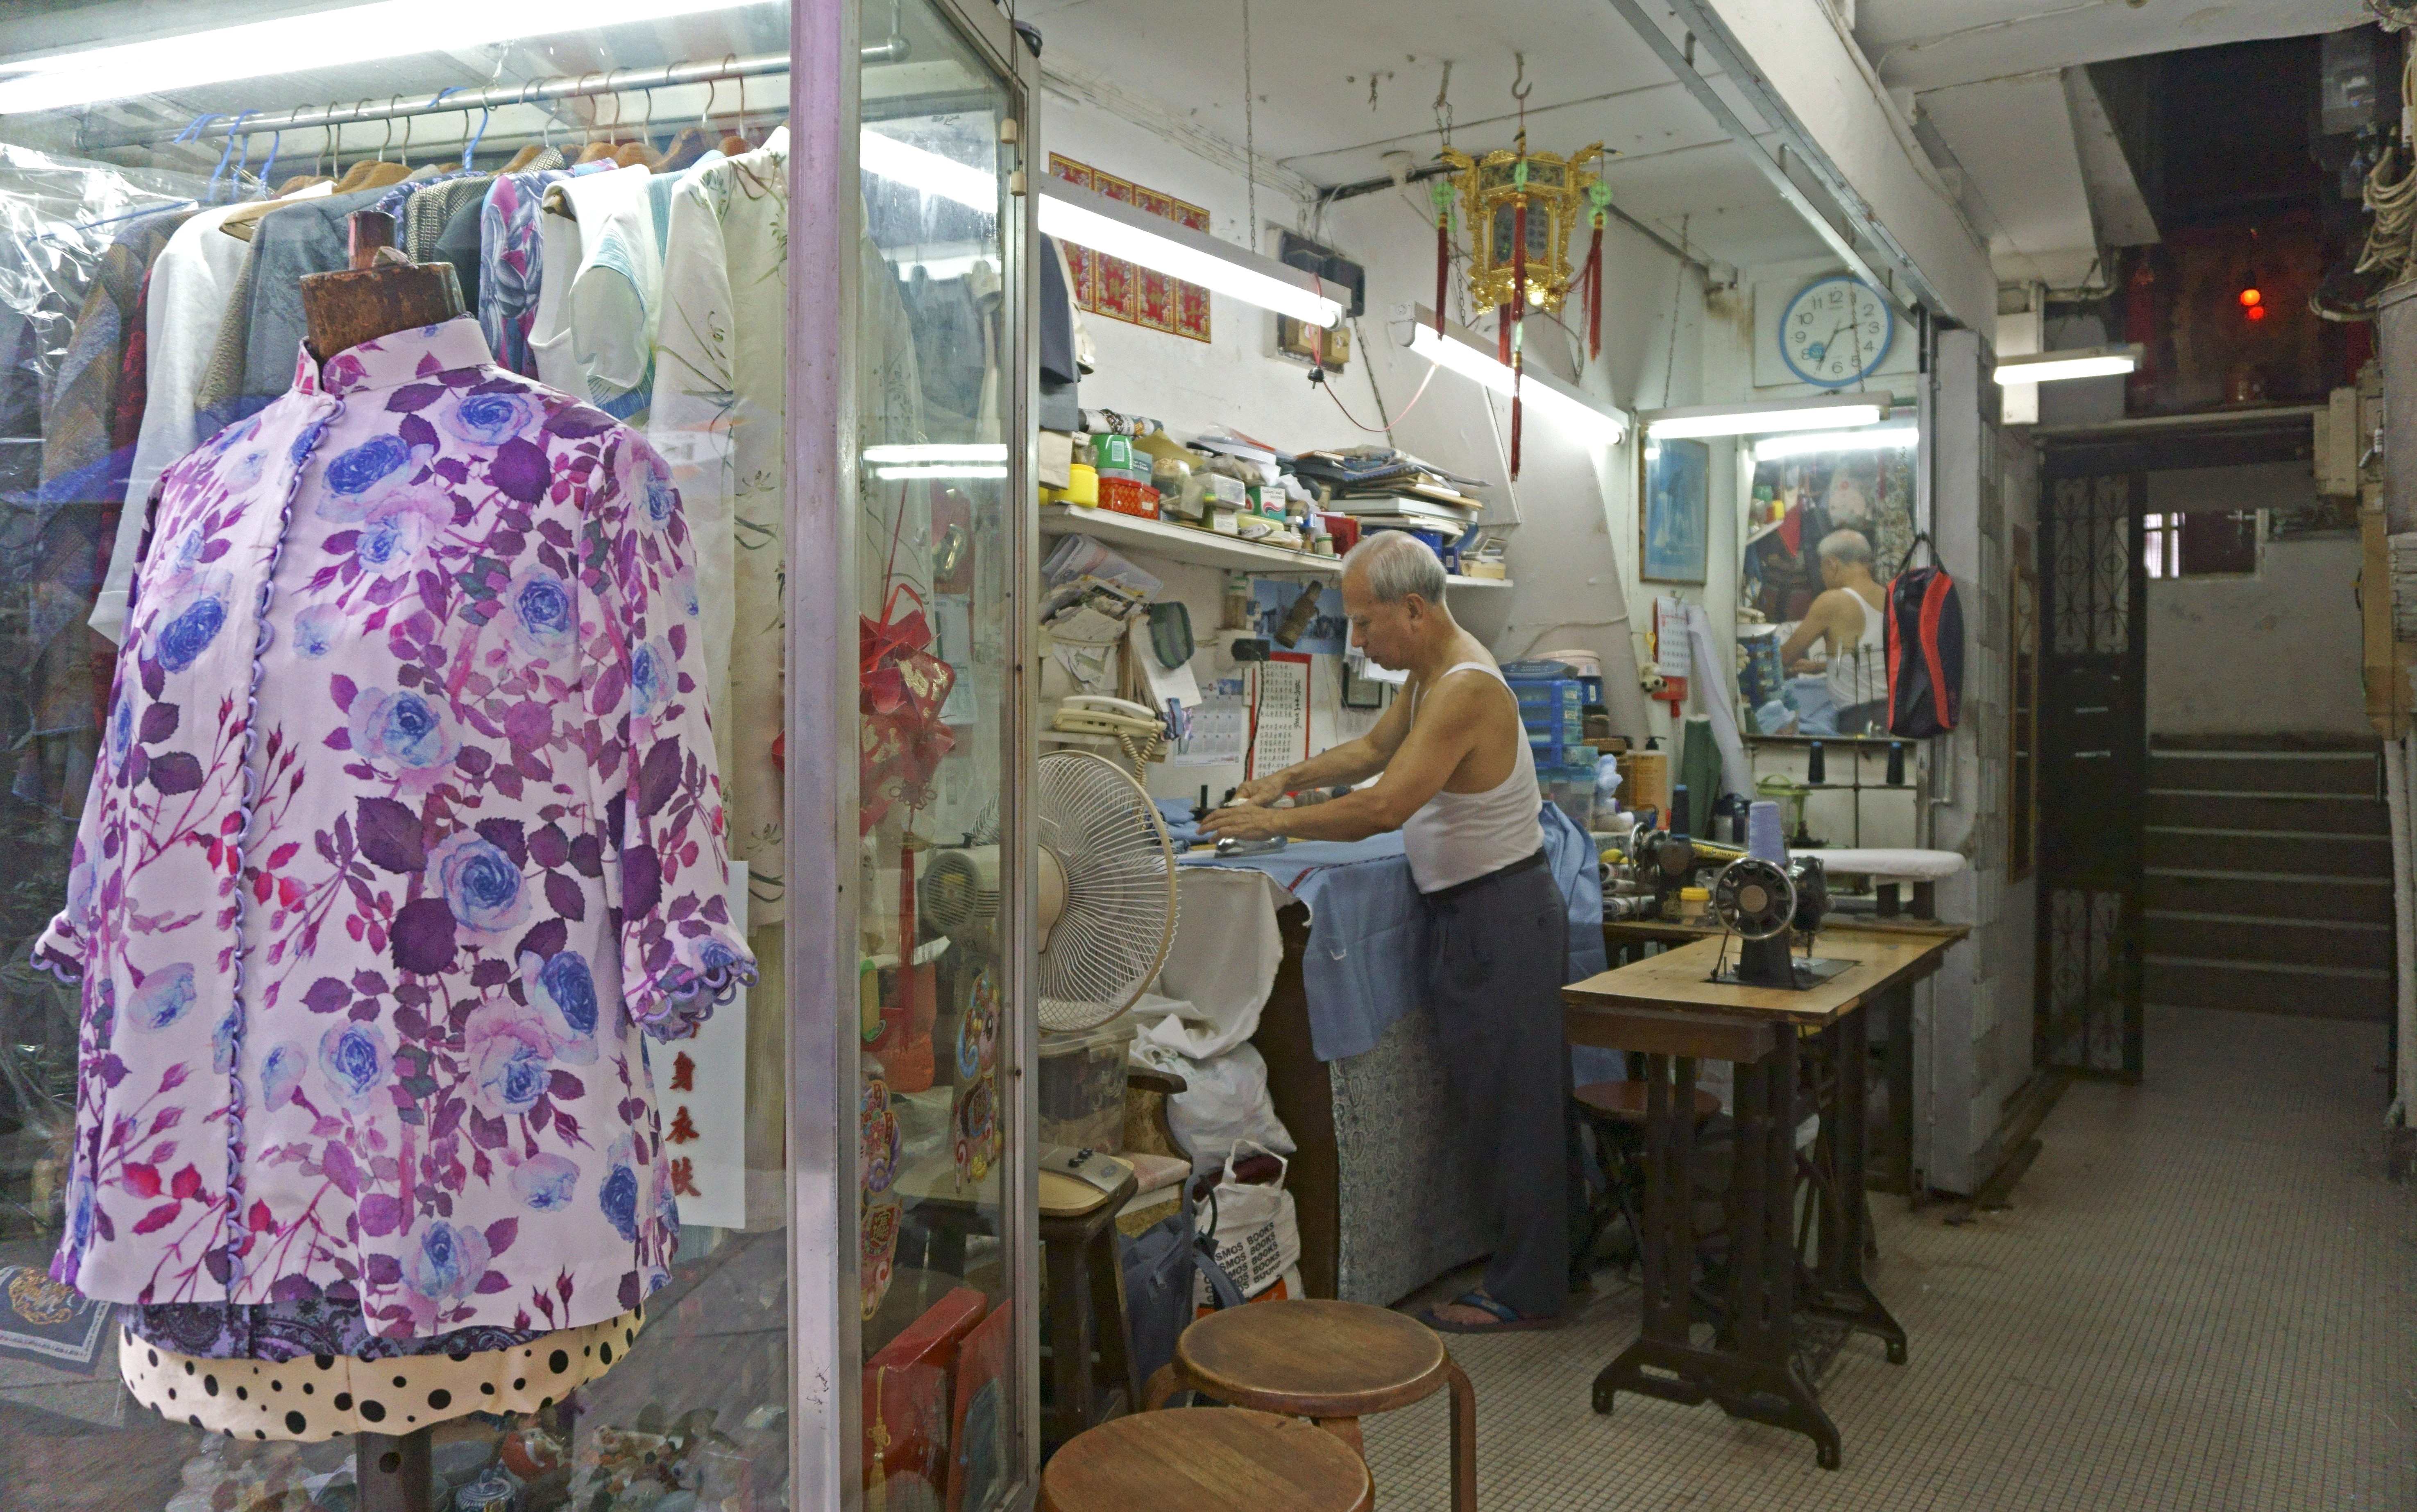 In the second of a series of portraits of the people still working in tiny spaces under the city’s staircases, we meet a cheongsam maker carving out a humble living surrounded by the swanky restaurants and bars of SoHo